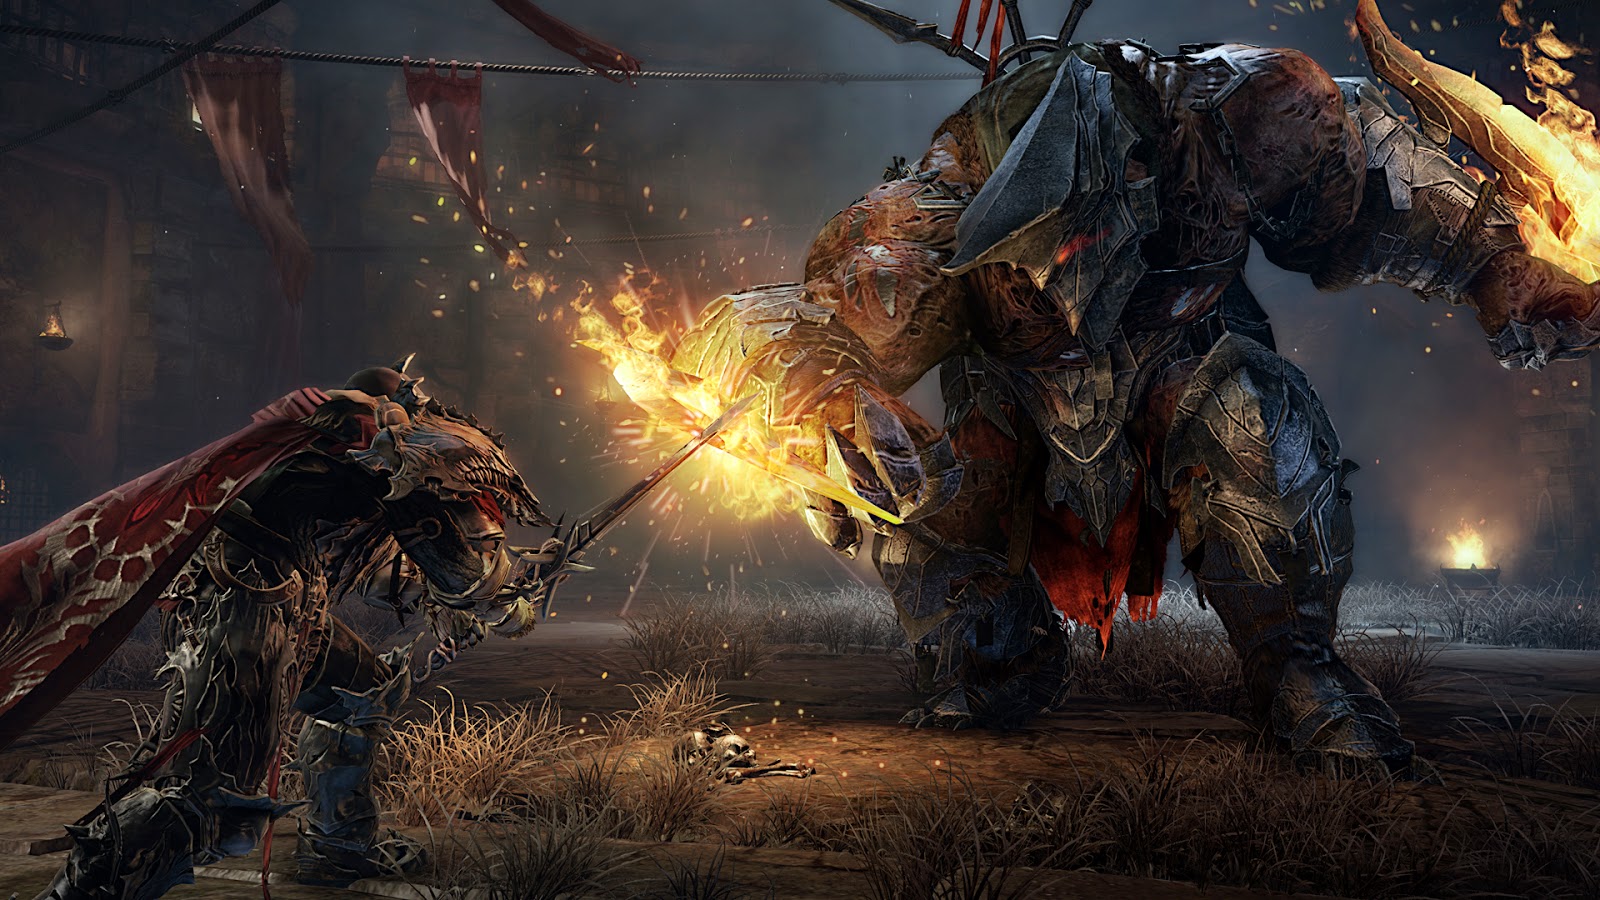 Lords of the Fallen Review - Fallen for You, RPGInformer